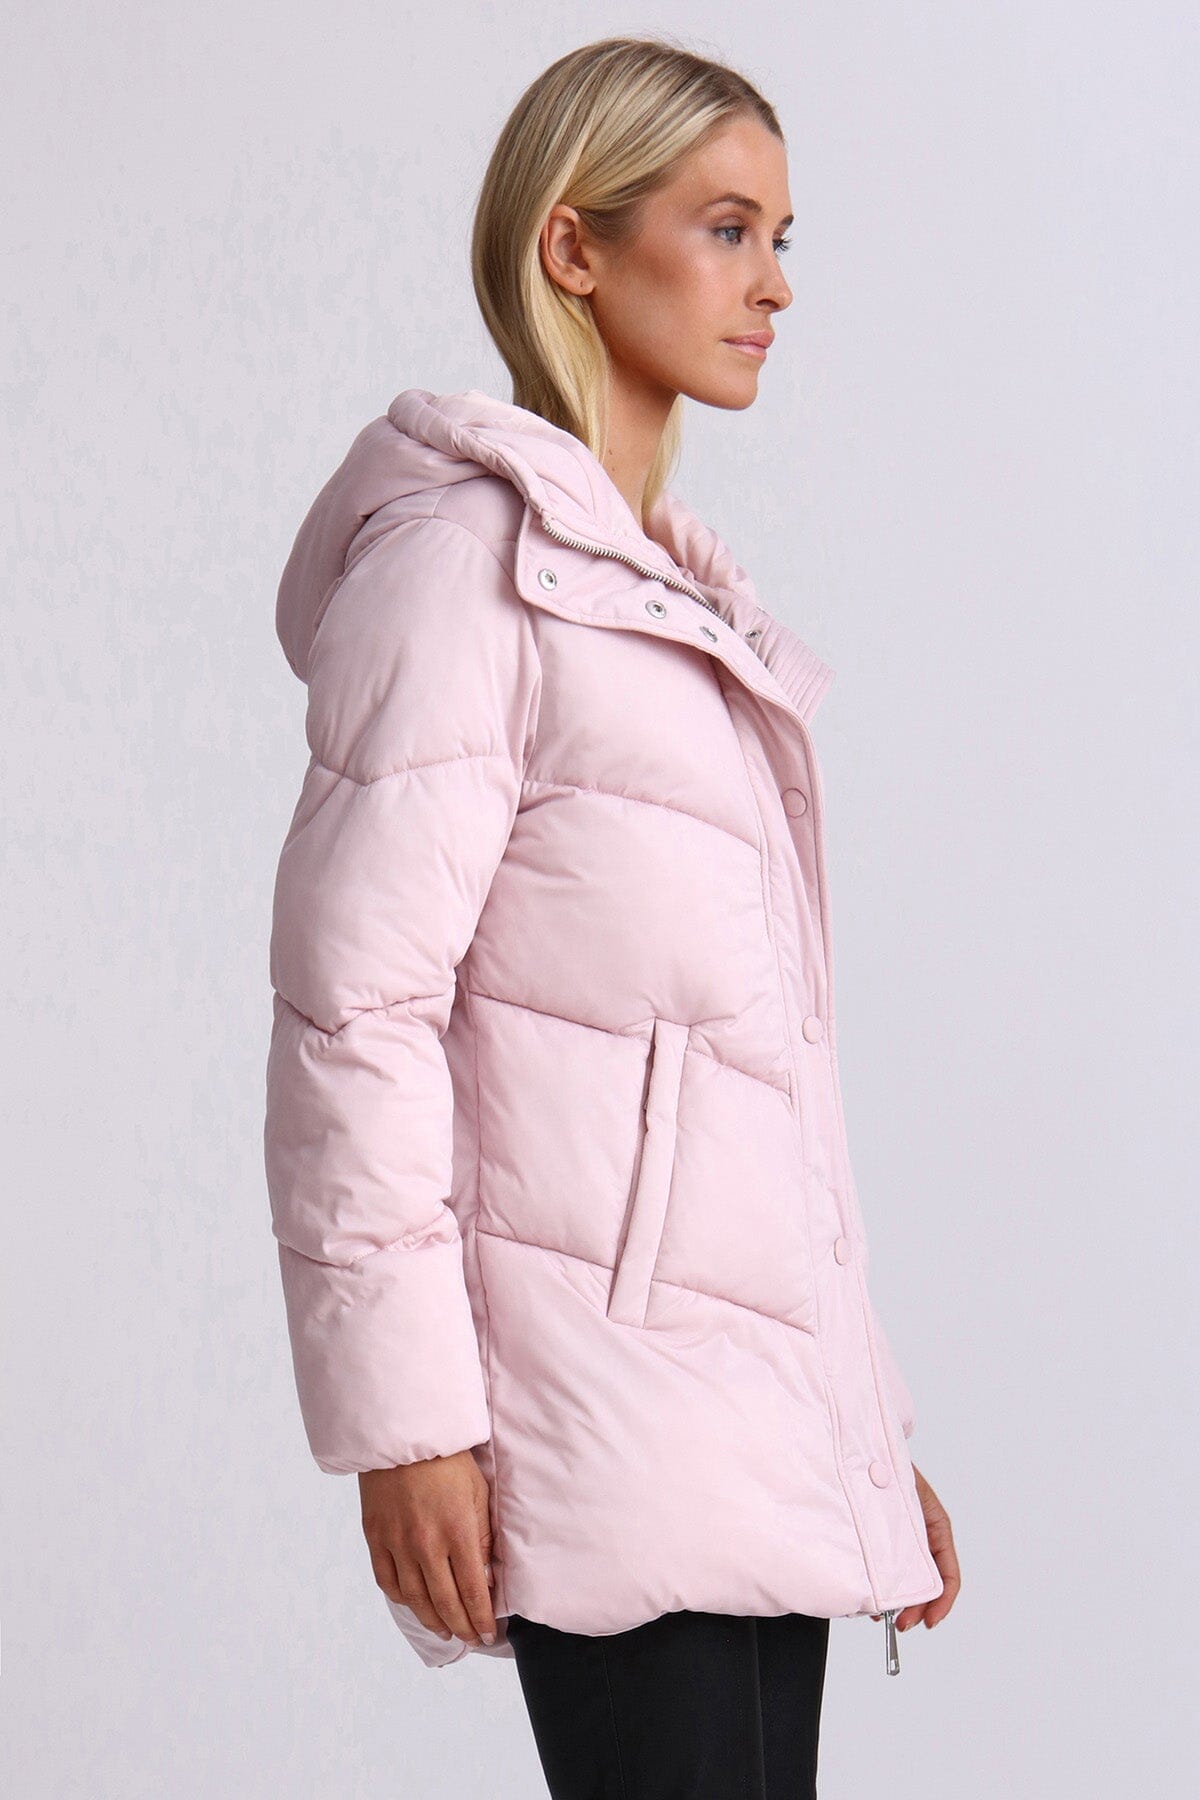 Light pink thermal puff cloud duvet hooded puffer coat jacket - women's figure flattering Fall Winter water resistant coats jackets by Aves Les Filles